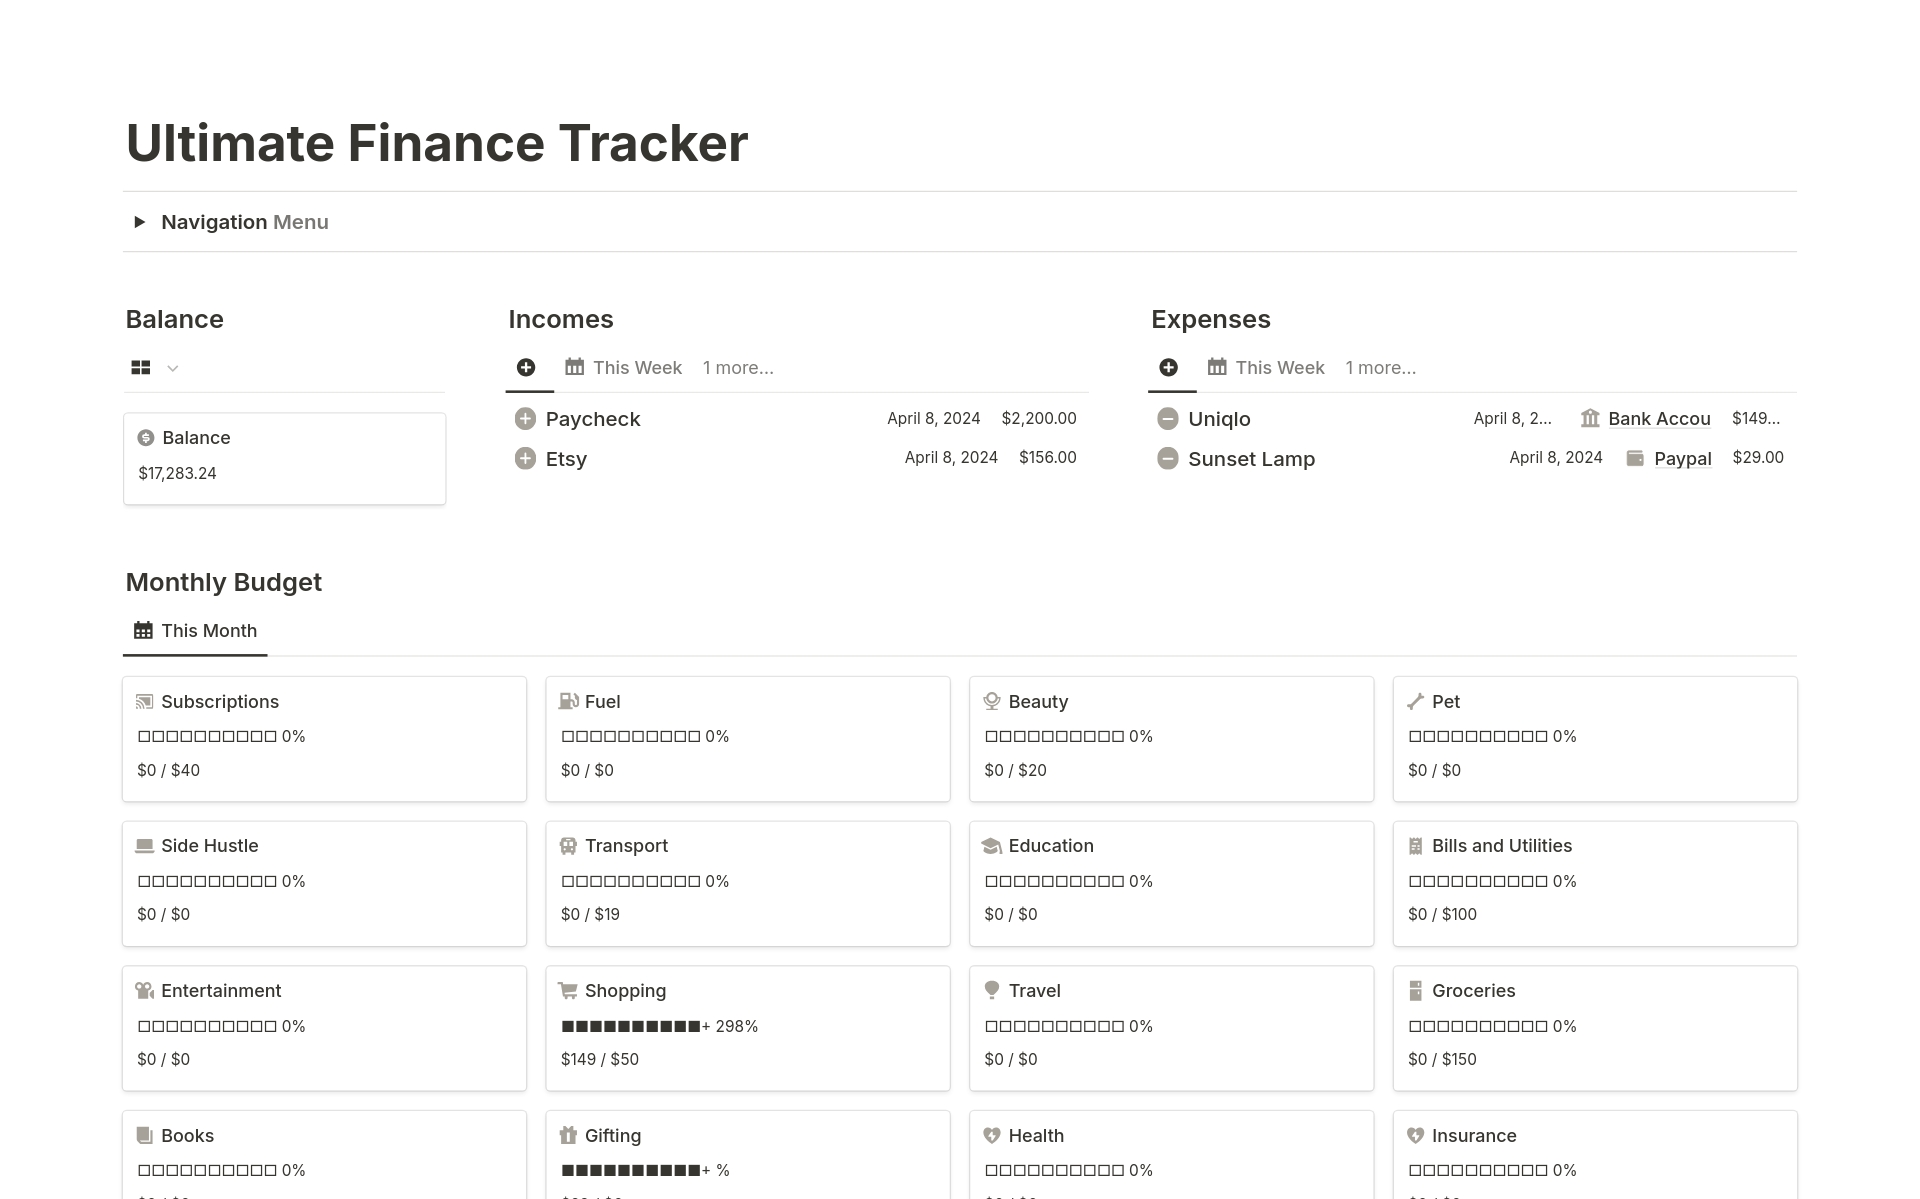 With Ultimate Notion Finance Tracker, you can save money and optimize your budget. Organize and analyze your cash flow, so you can see the big picture of your finances and make better financial decisions.